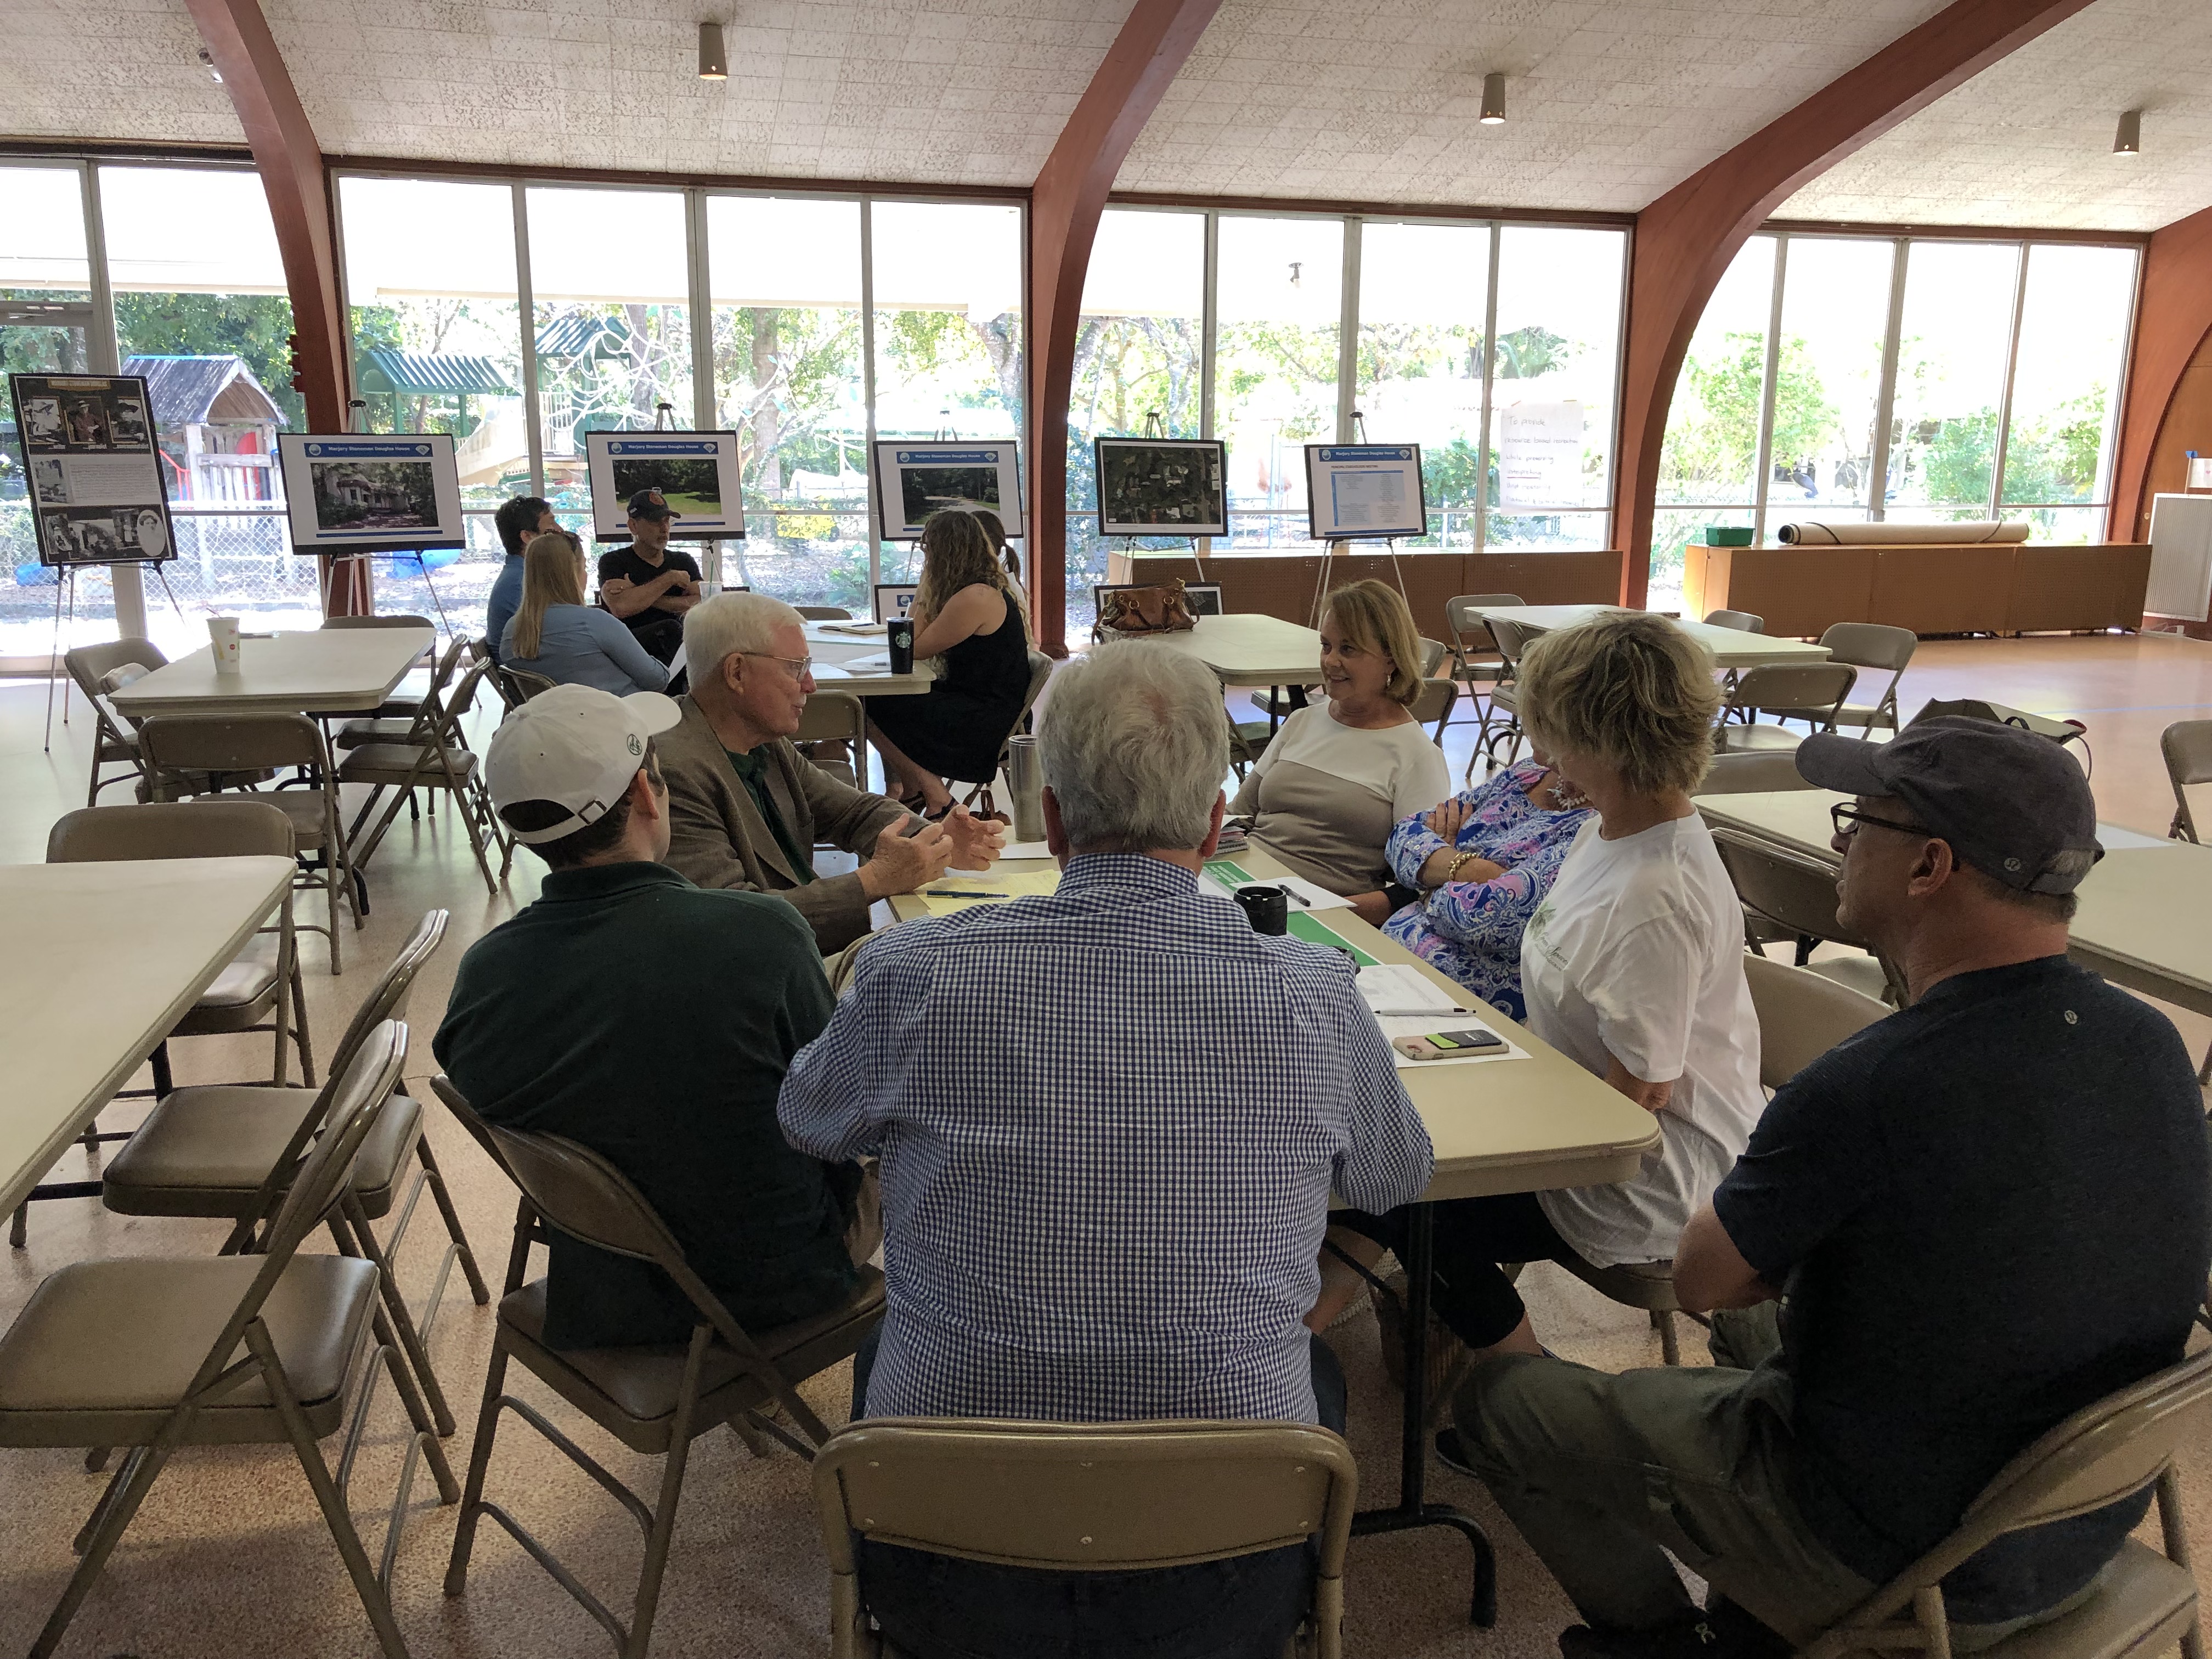 Stakeholders discuss the future of the Marjory Stoneman Douglas House.